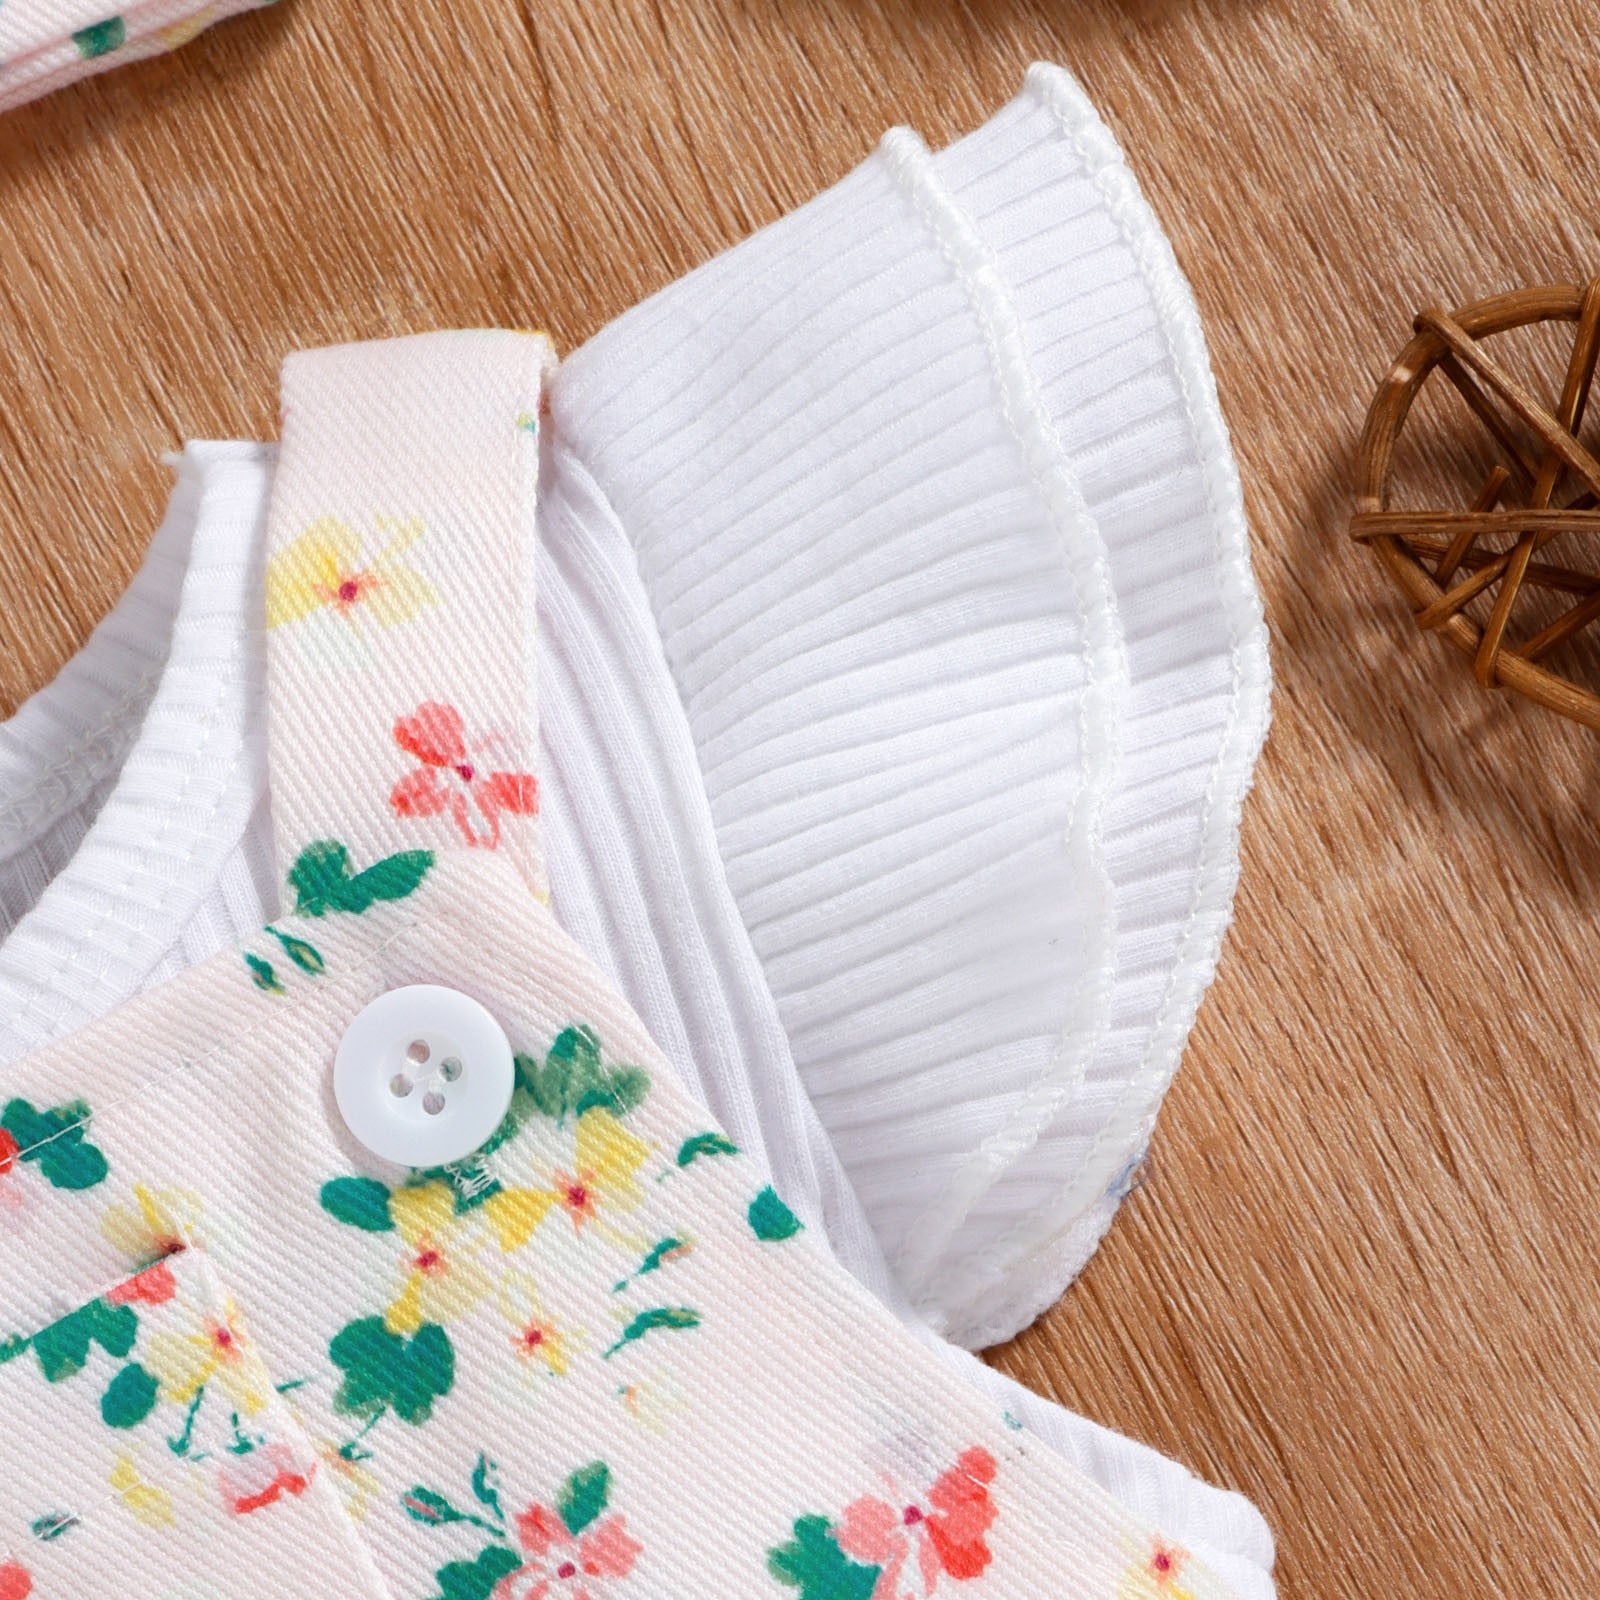 Adorable Infant Baby Girls Clothes Sets with Fly Sleeve Plain Tees and Floral Suspender Shorts